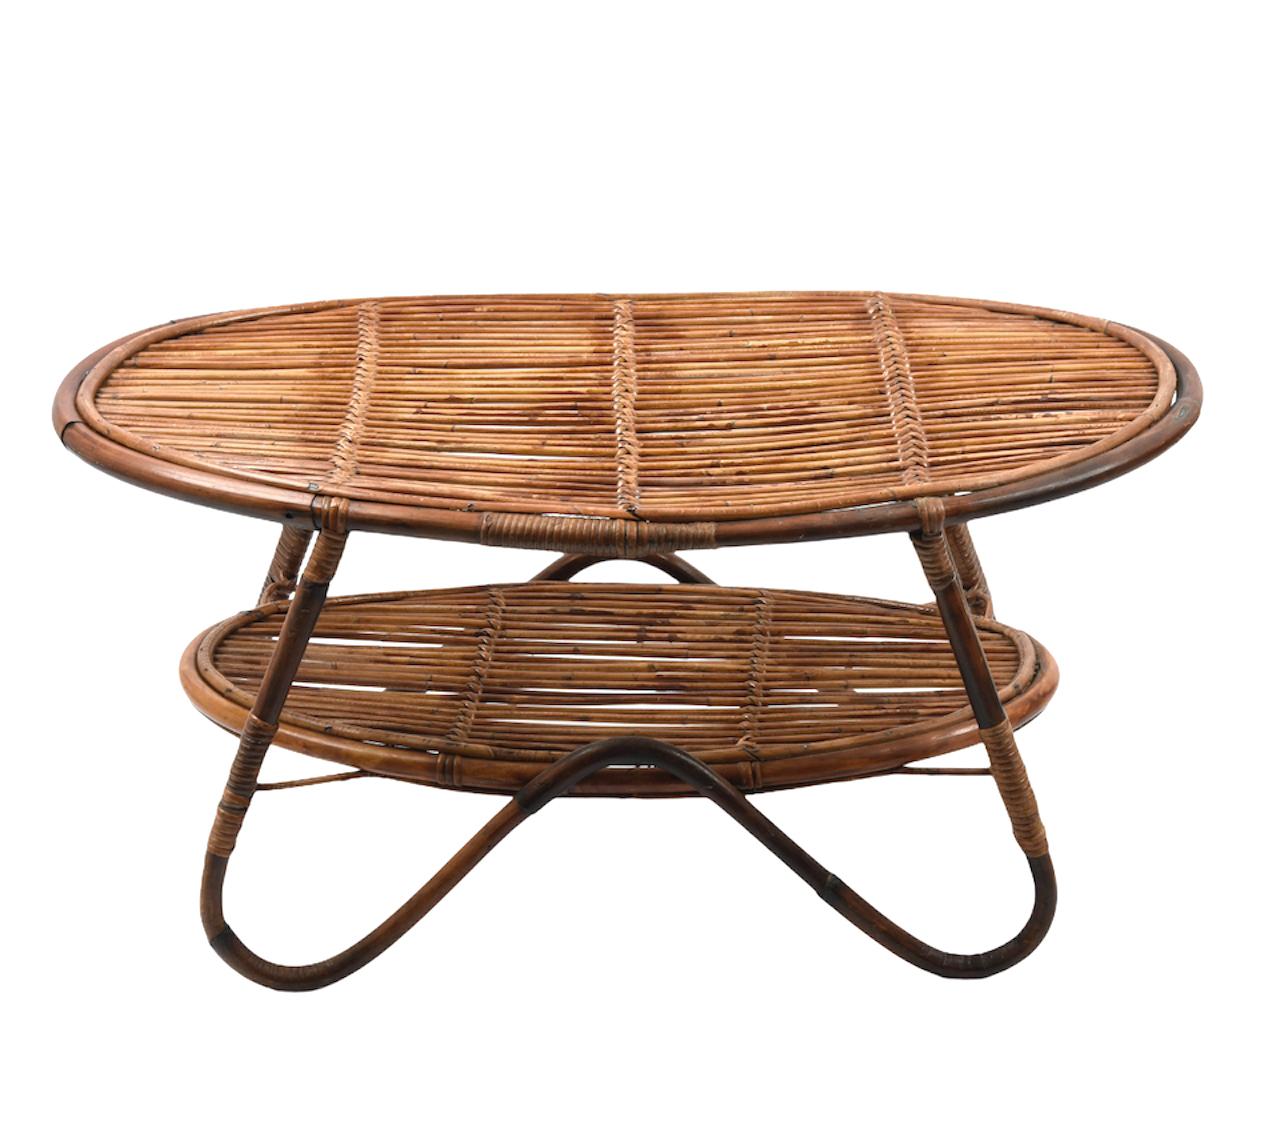 Midcentury Italian Oval Rattan and Bamboo Two Levels Coffee Table, 1950s For Sale 4